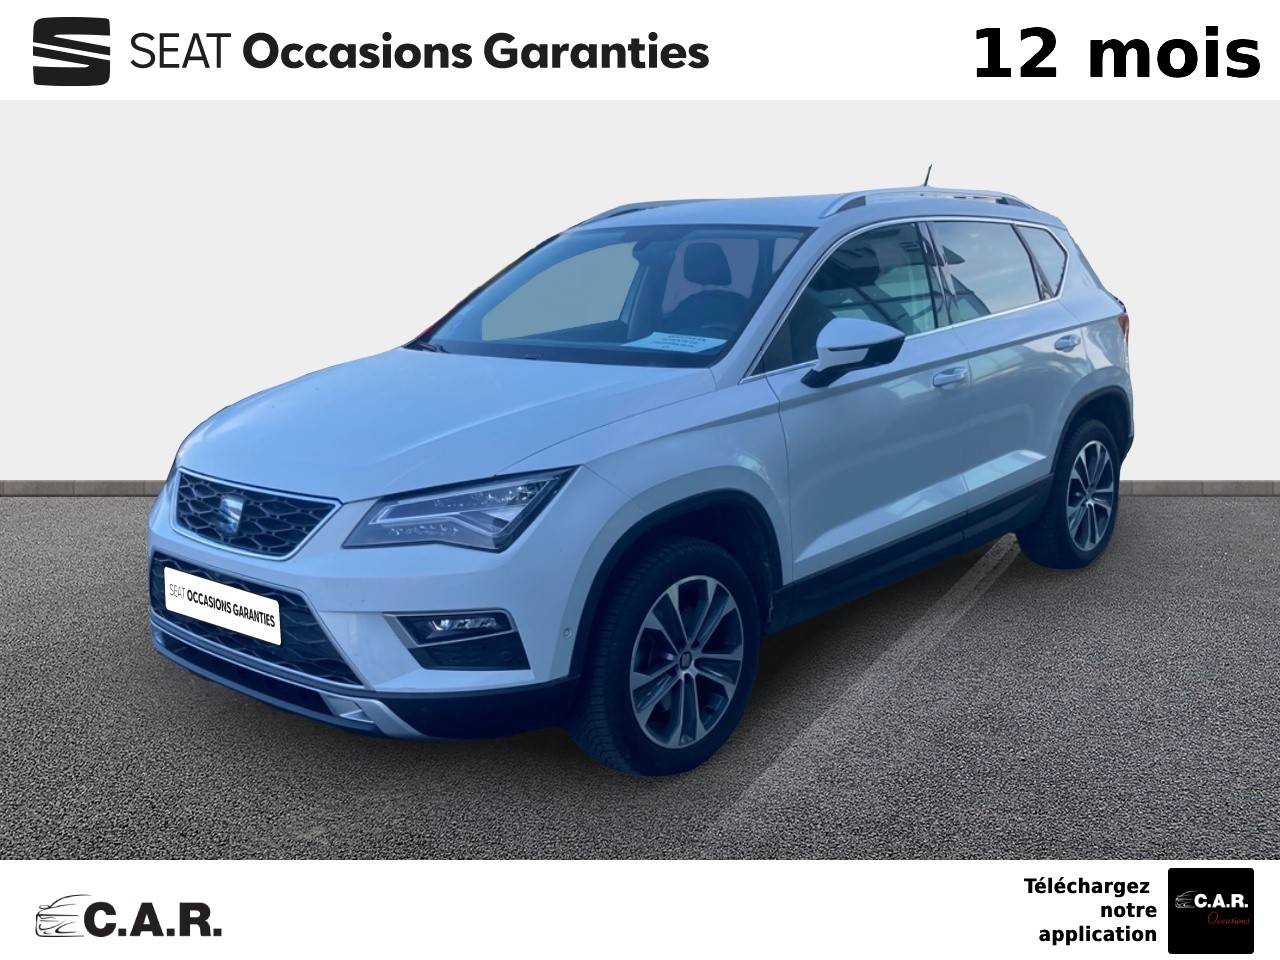 Occasion SEAT Ateca 1.4 EcoTSI 150 ch ACT Start/Stop